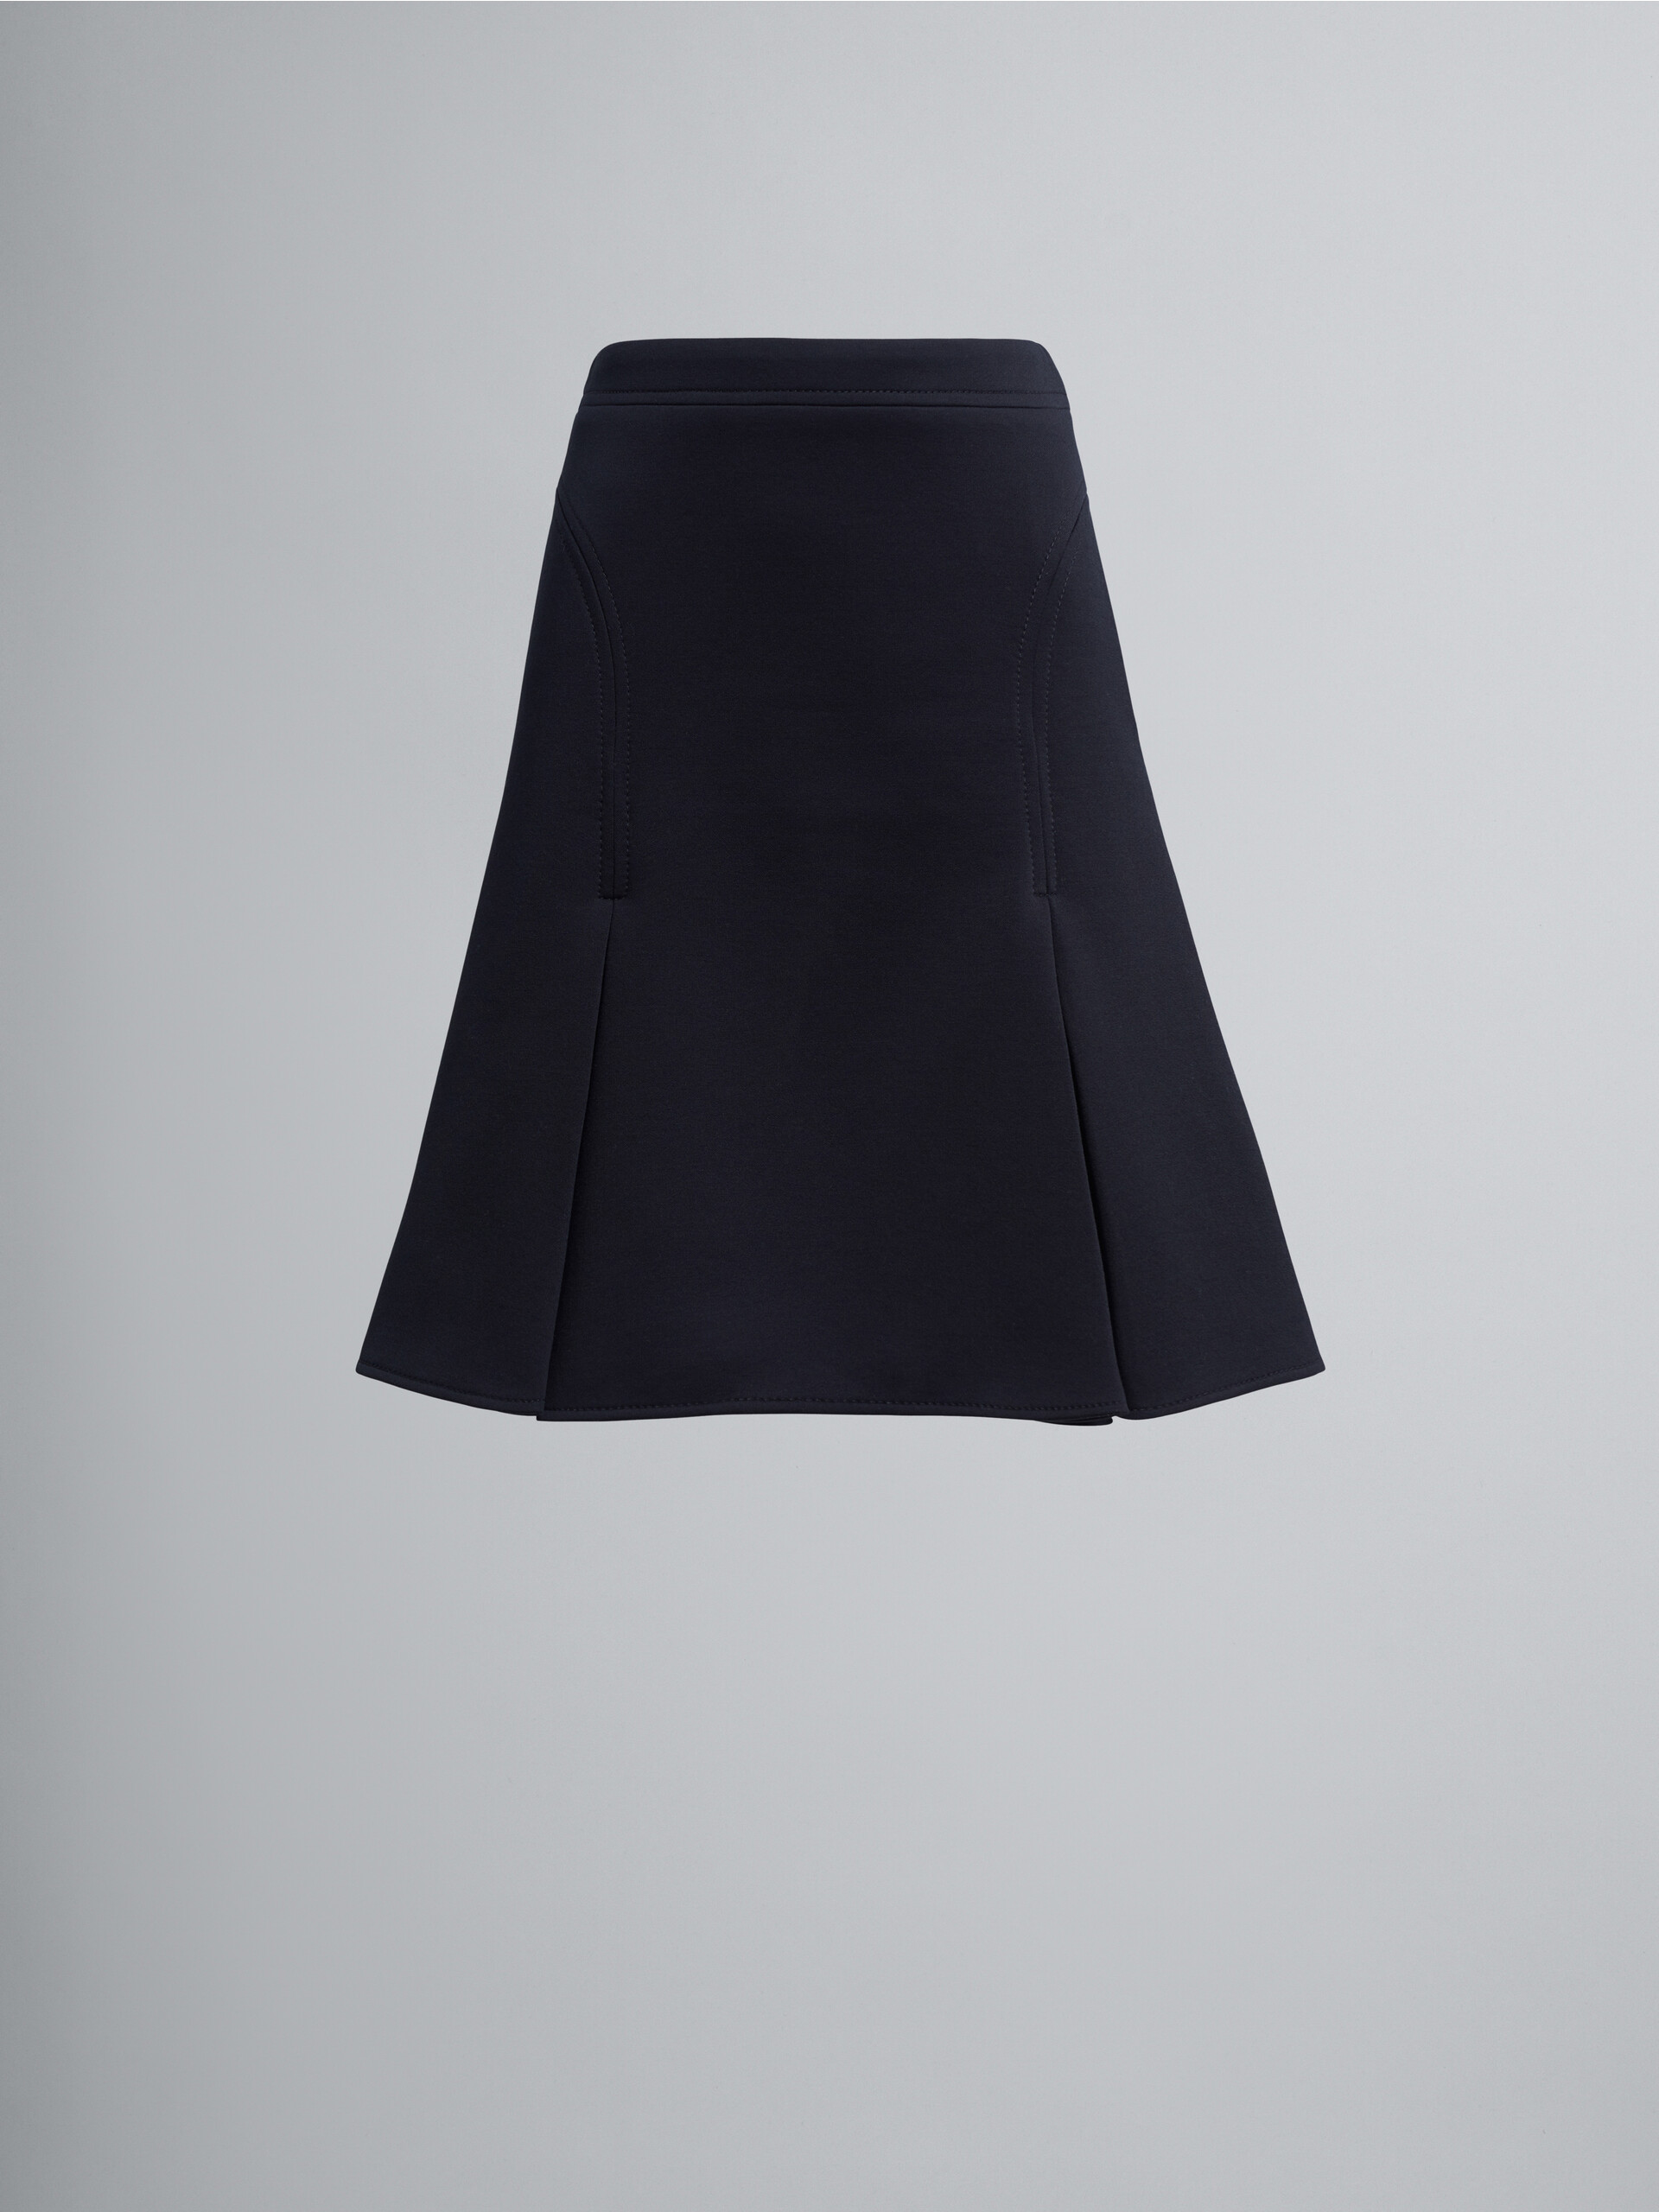 Double face jersey skirt - Skirts - Image 1